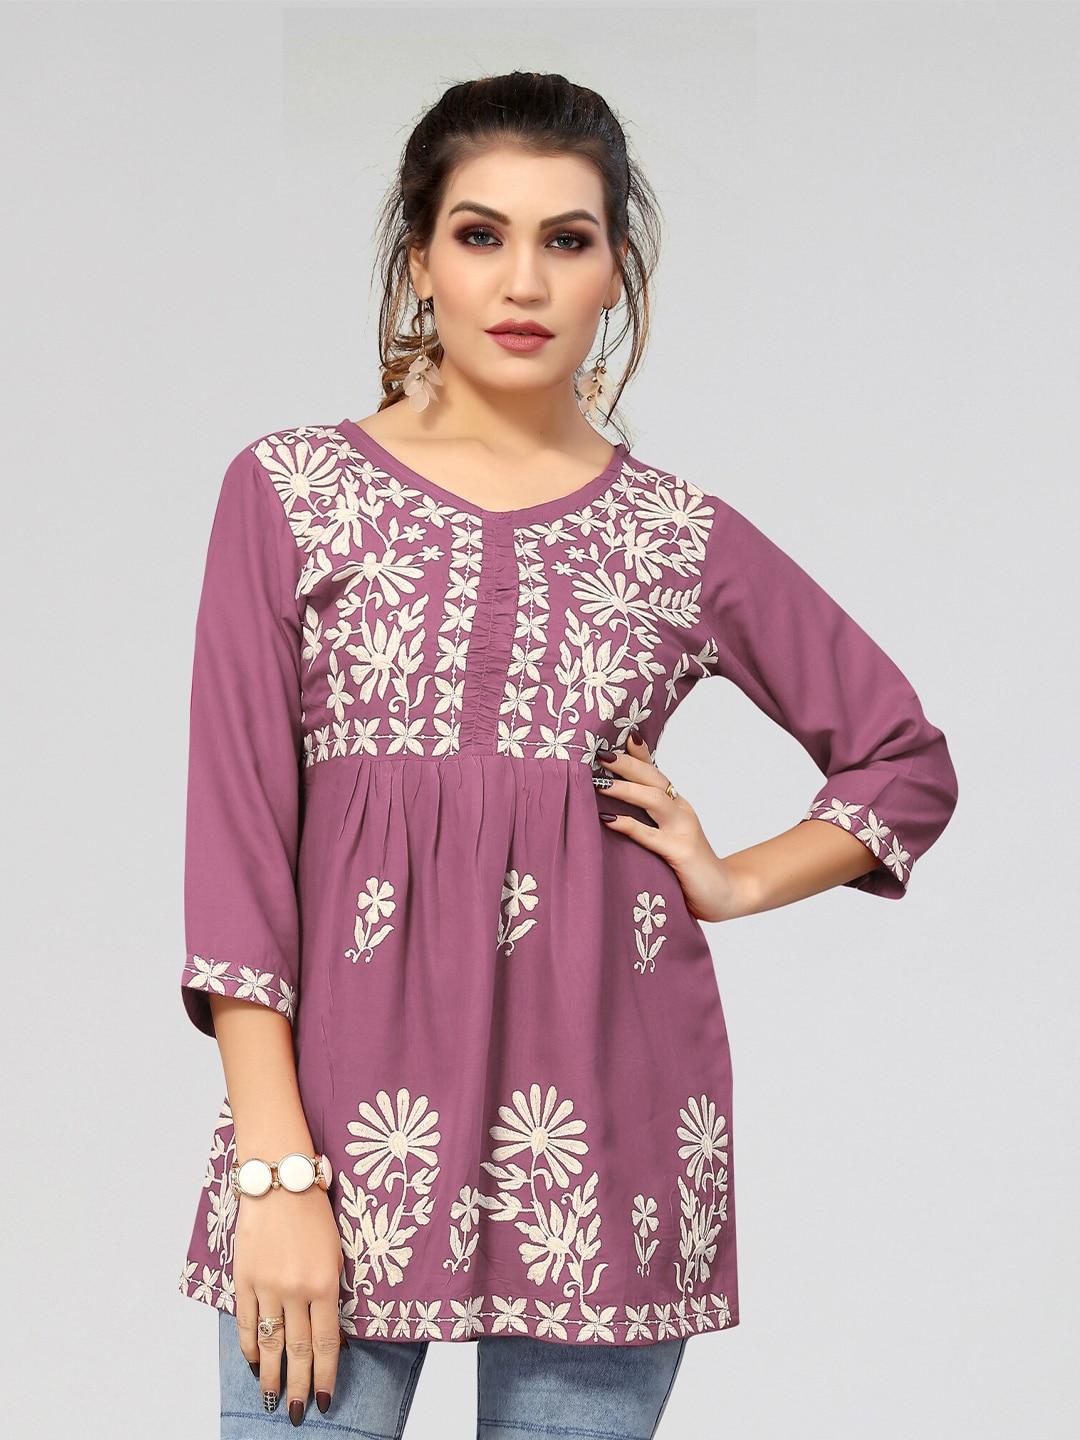 Winza Designer Floral Embroidered A Line Top